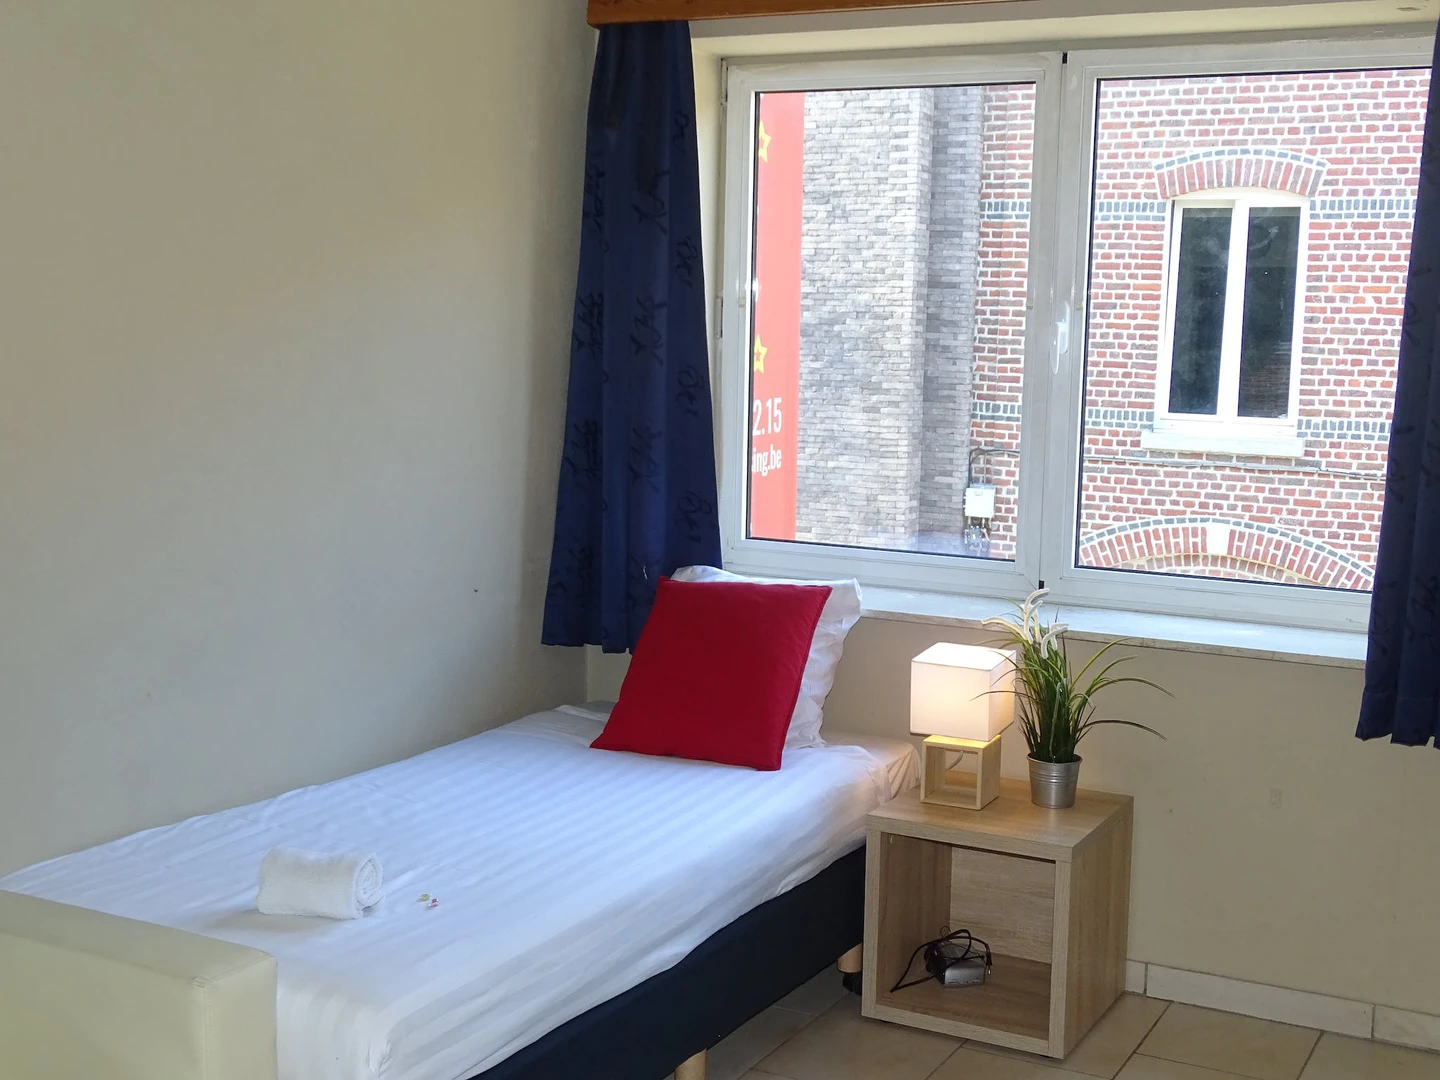 Room for rent with double bed Leuven